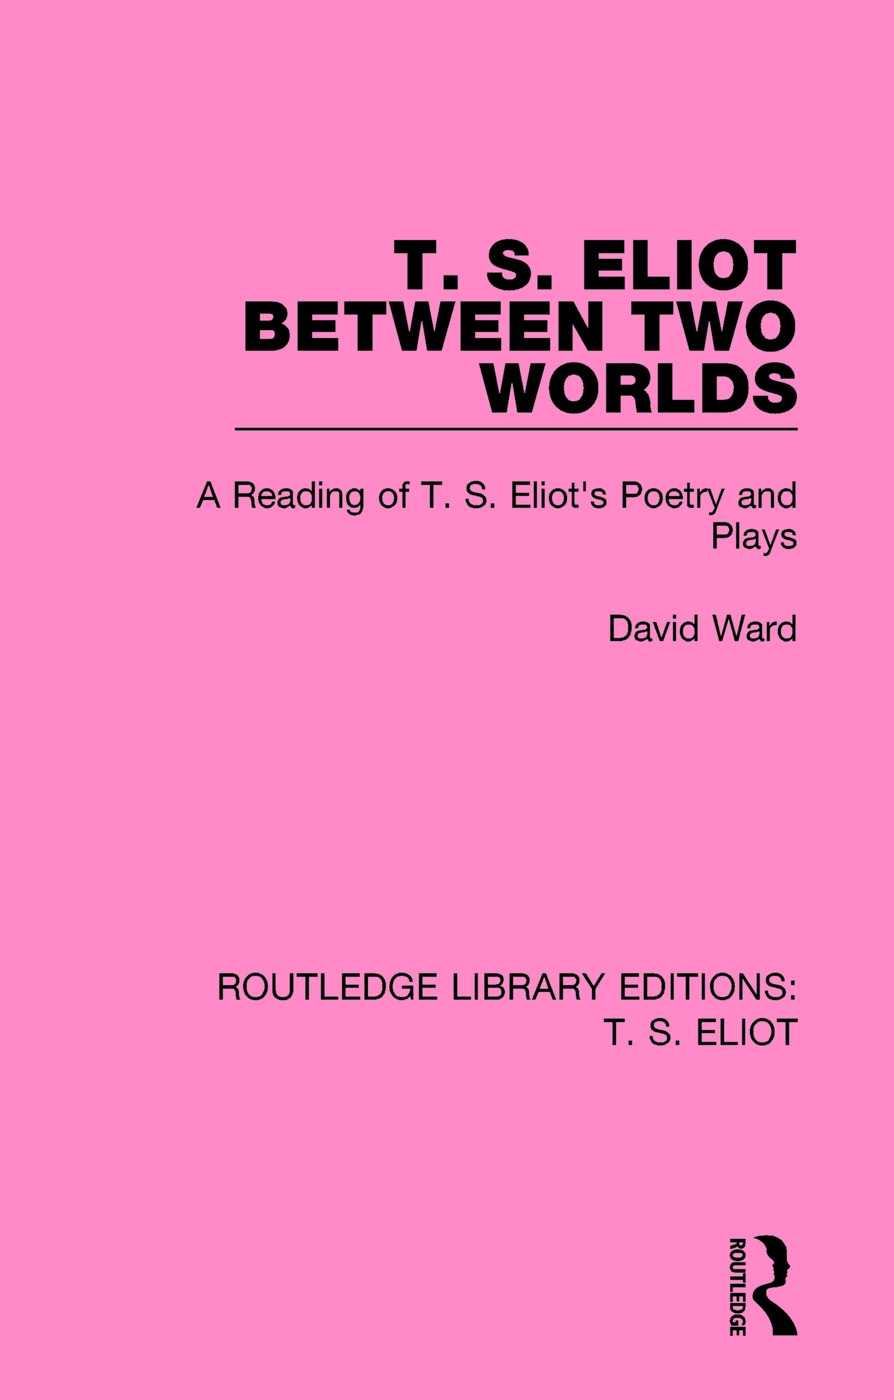 T. S. Eliot Between Two Worlds: A Reading of T. S. Eliot’s Poetry and Plays